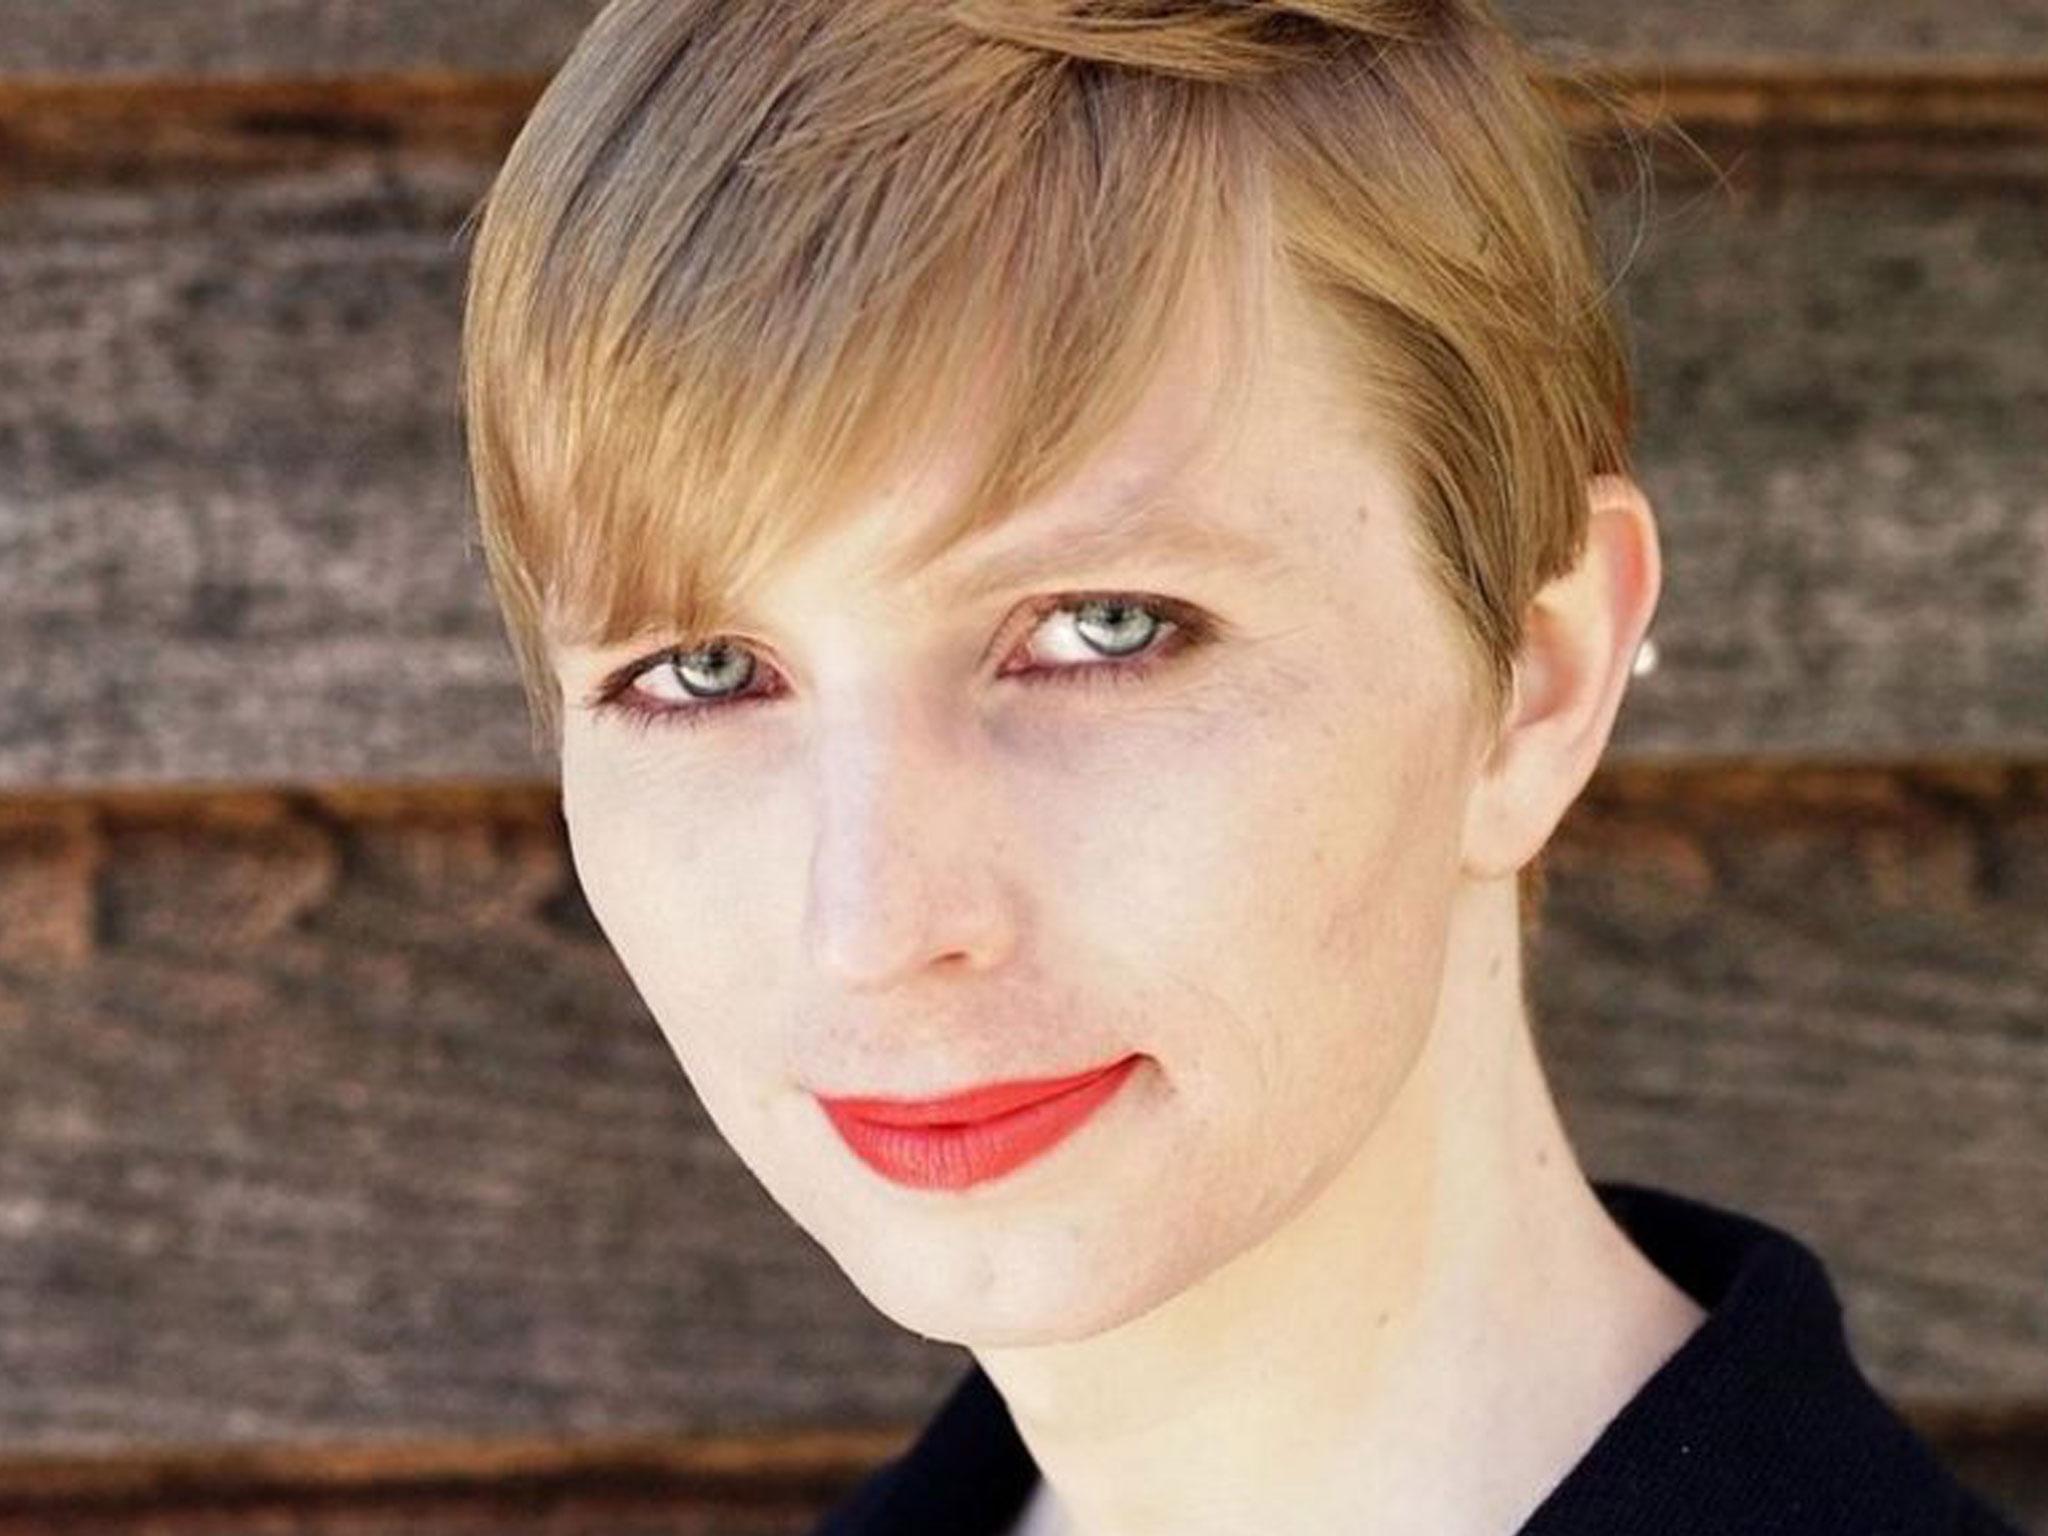 A new photo of Chelsea Manning was released after her release from prison